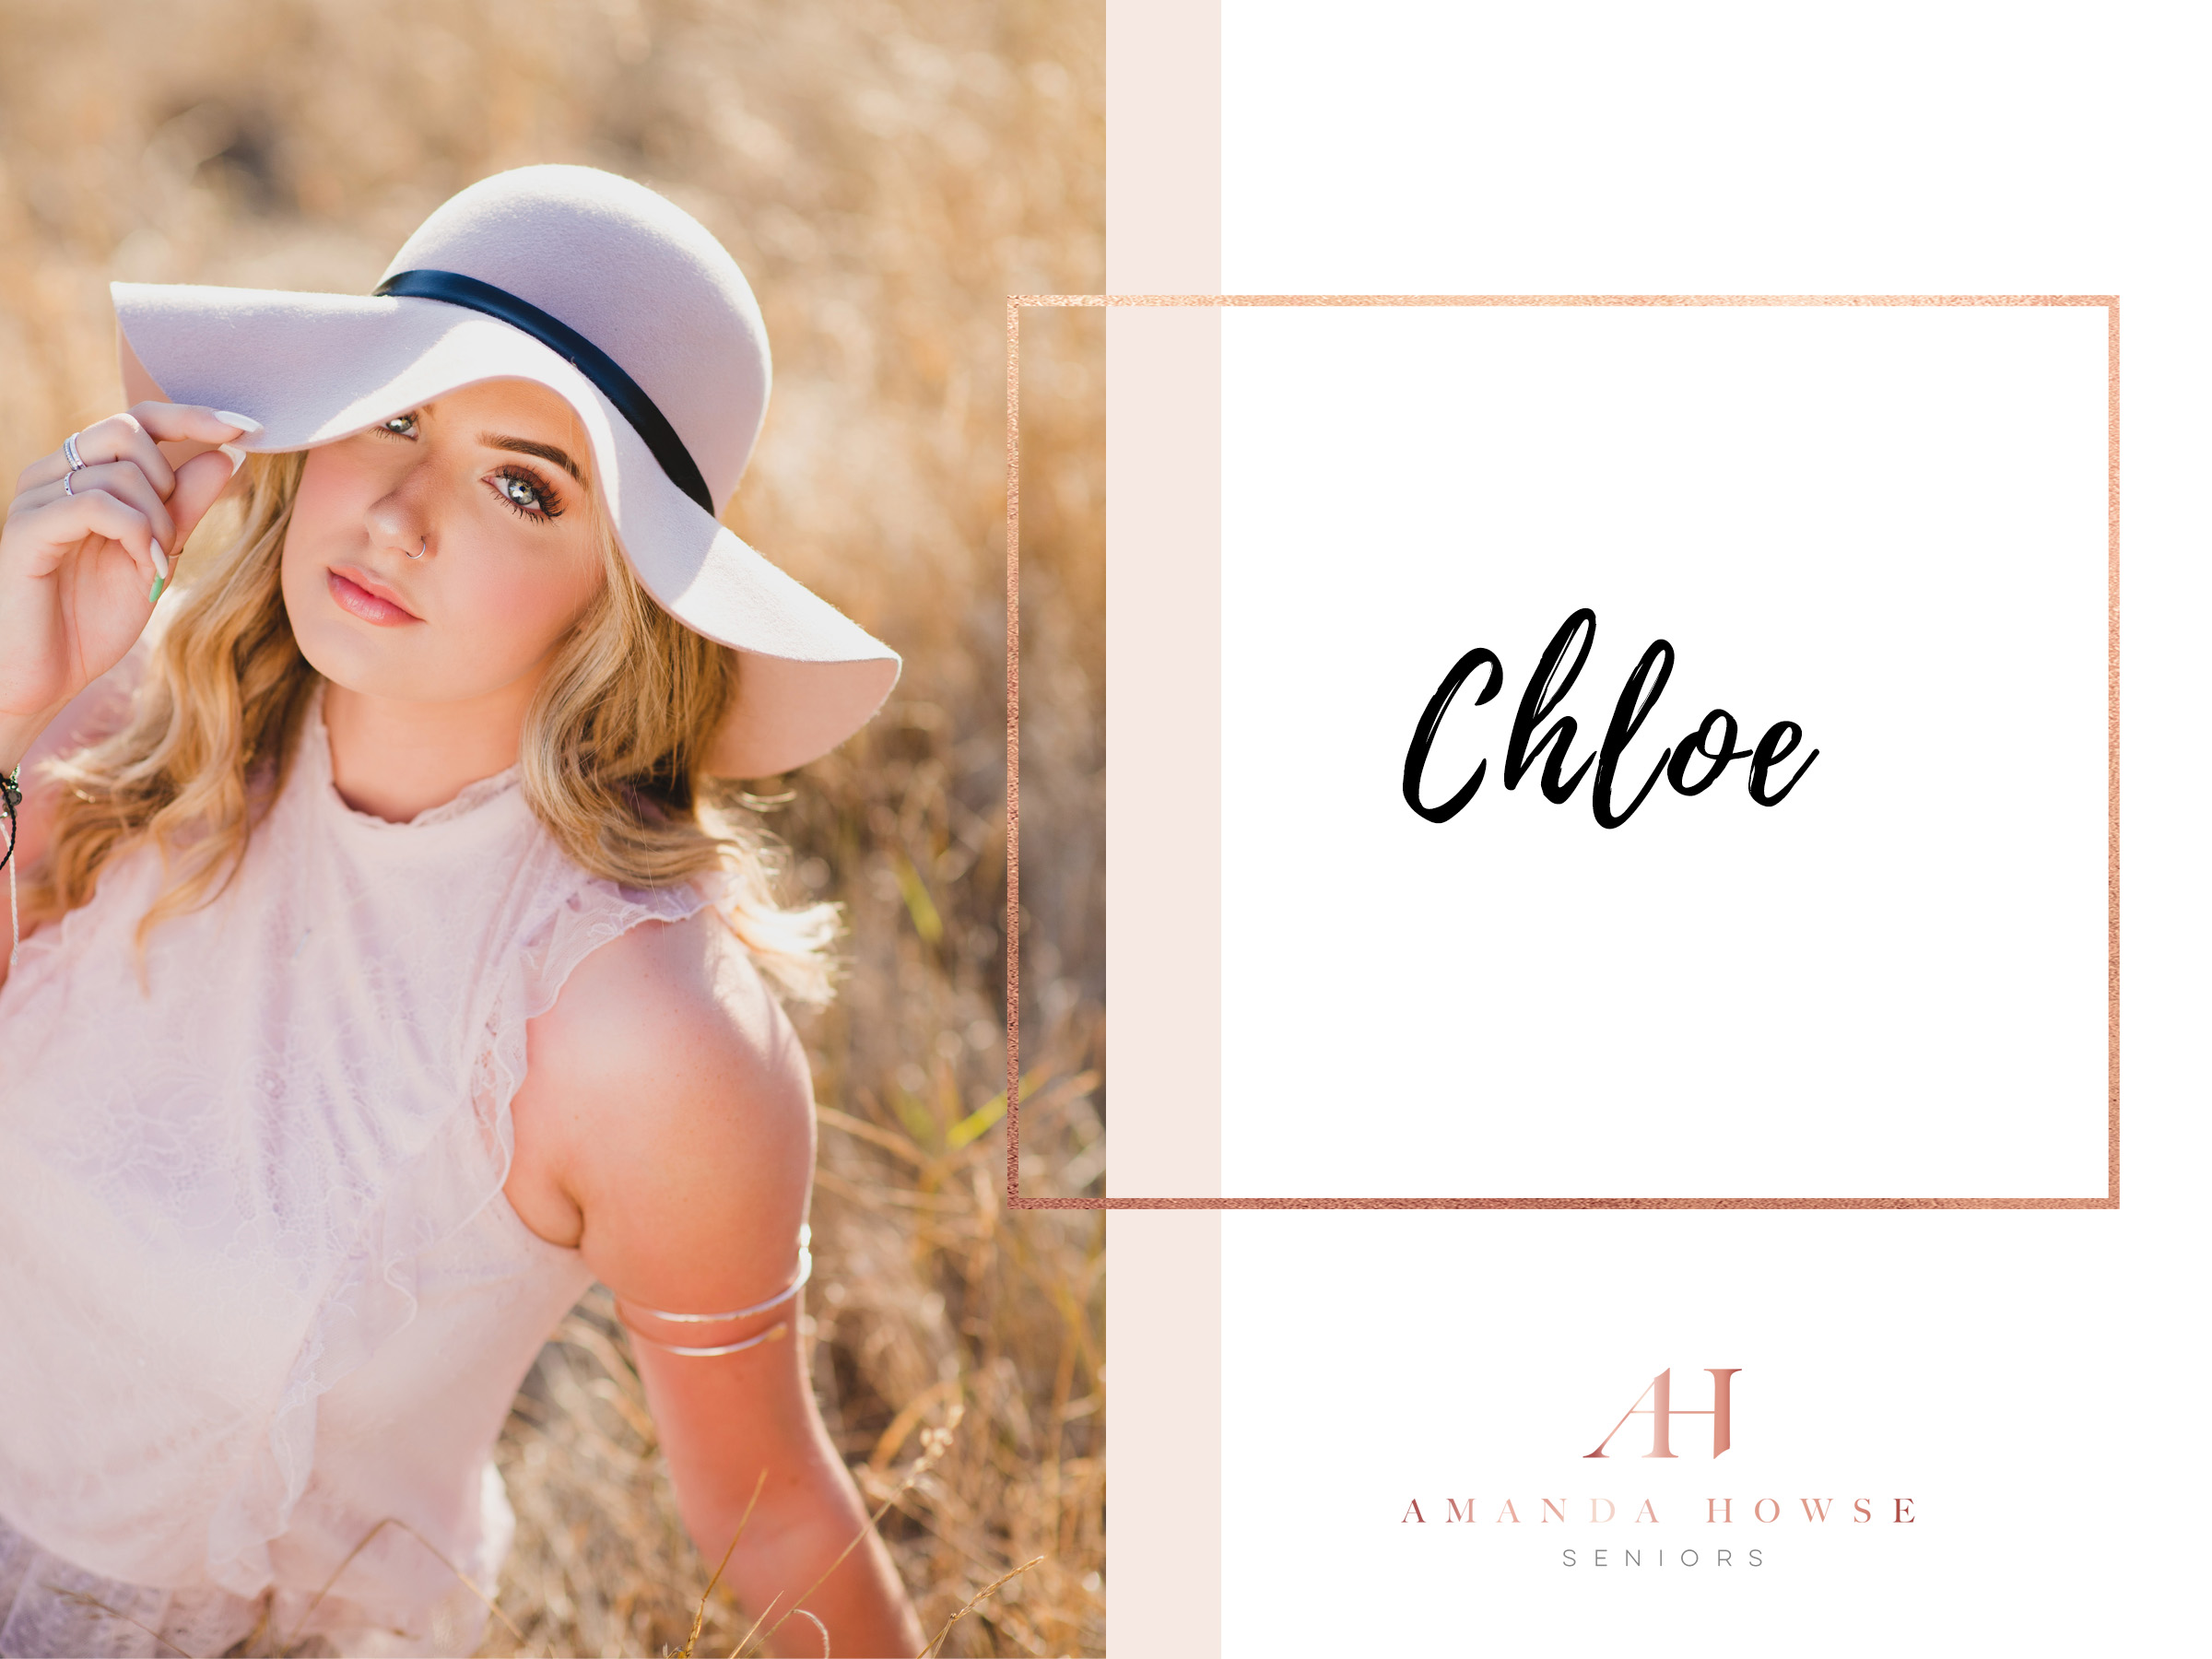 Fashion Inspiration from a Summer Fort Steilacoom Senior Portrait Session Photographed by Tacoma Senior Photographer Amanda Howse